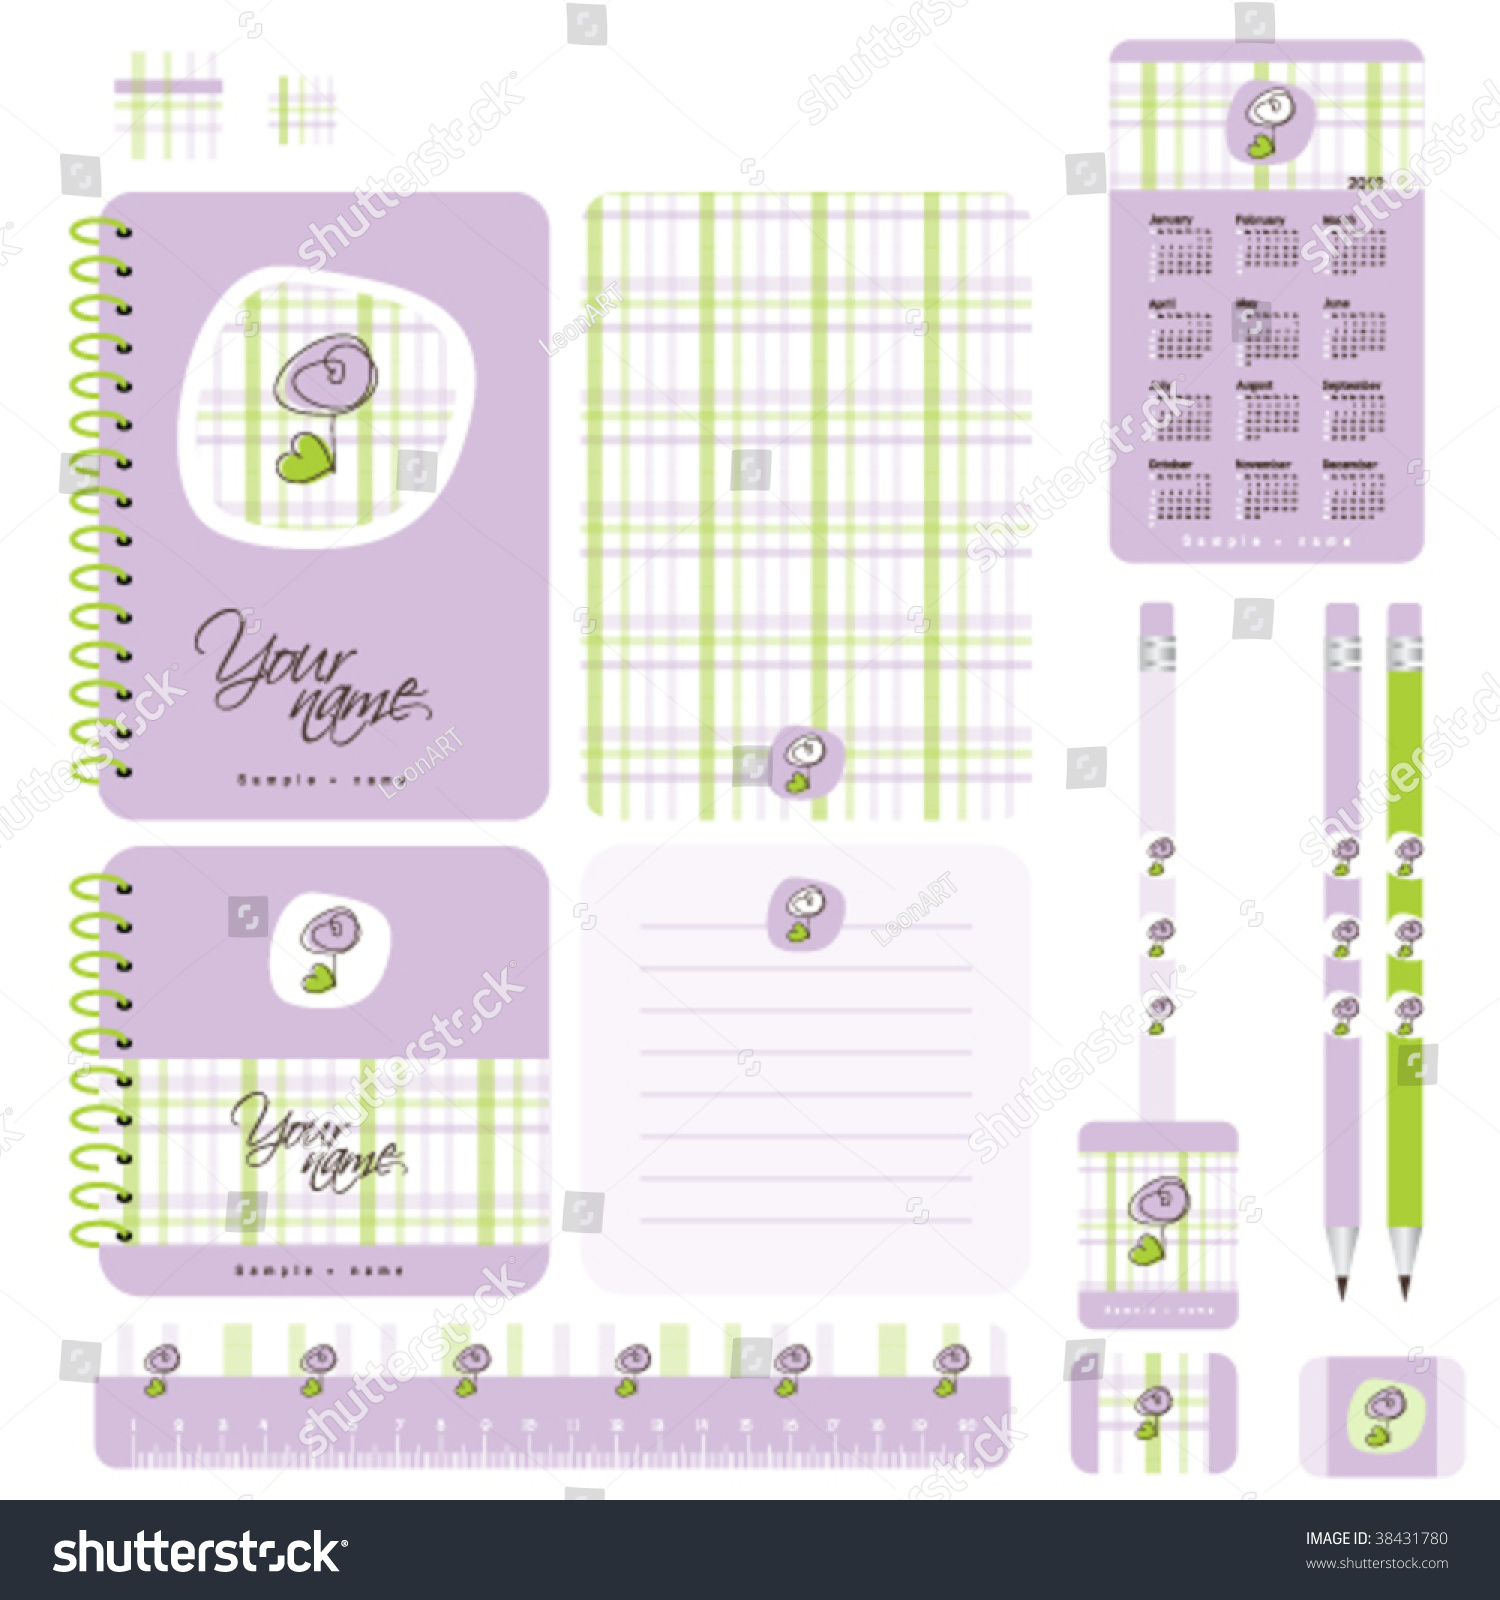 Design elements for notebook and other school accessories #38431780